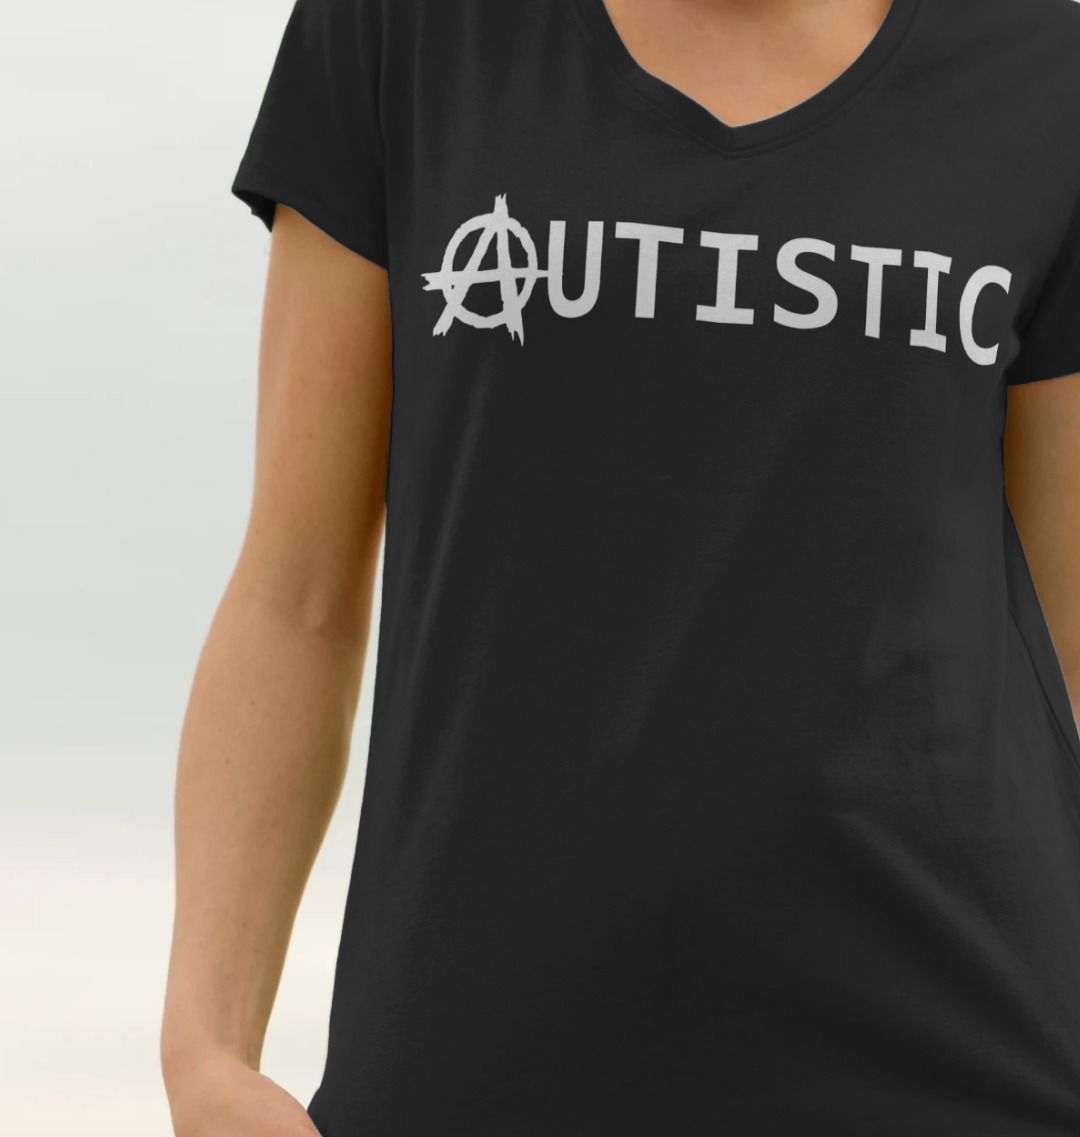 Autistic Anarchy womens fit V neck T-shirt